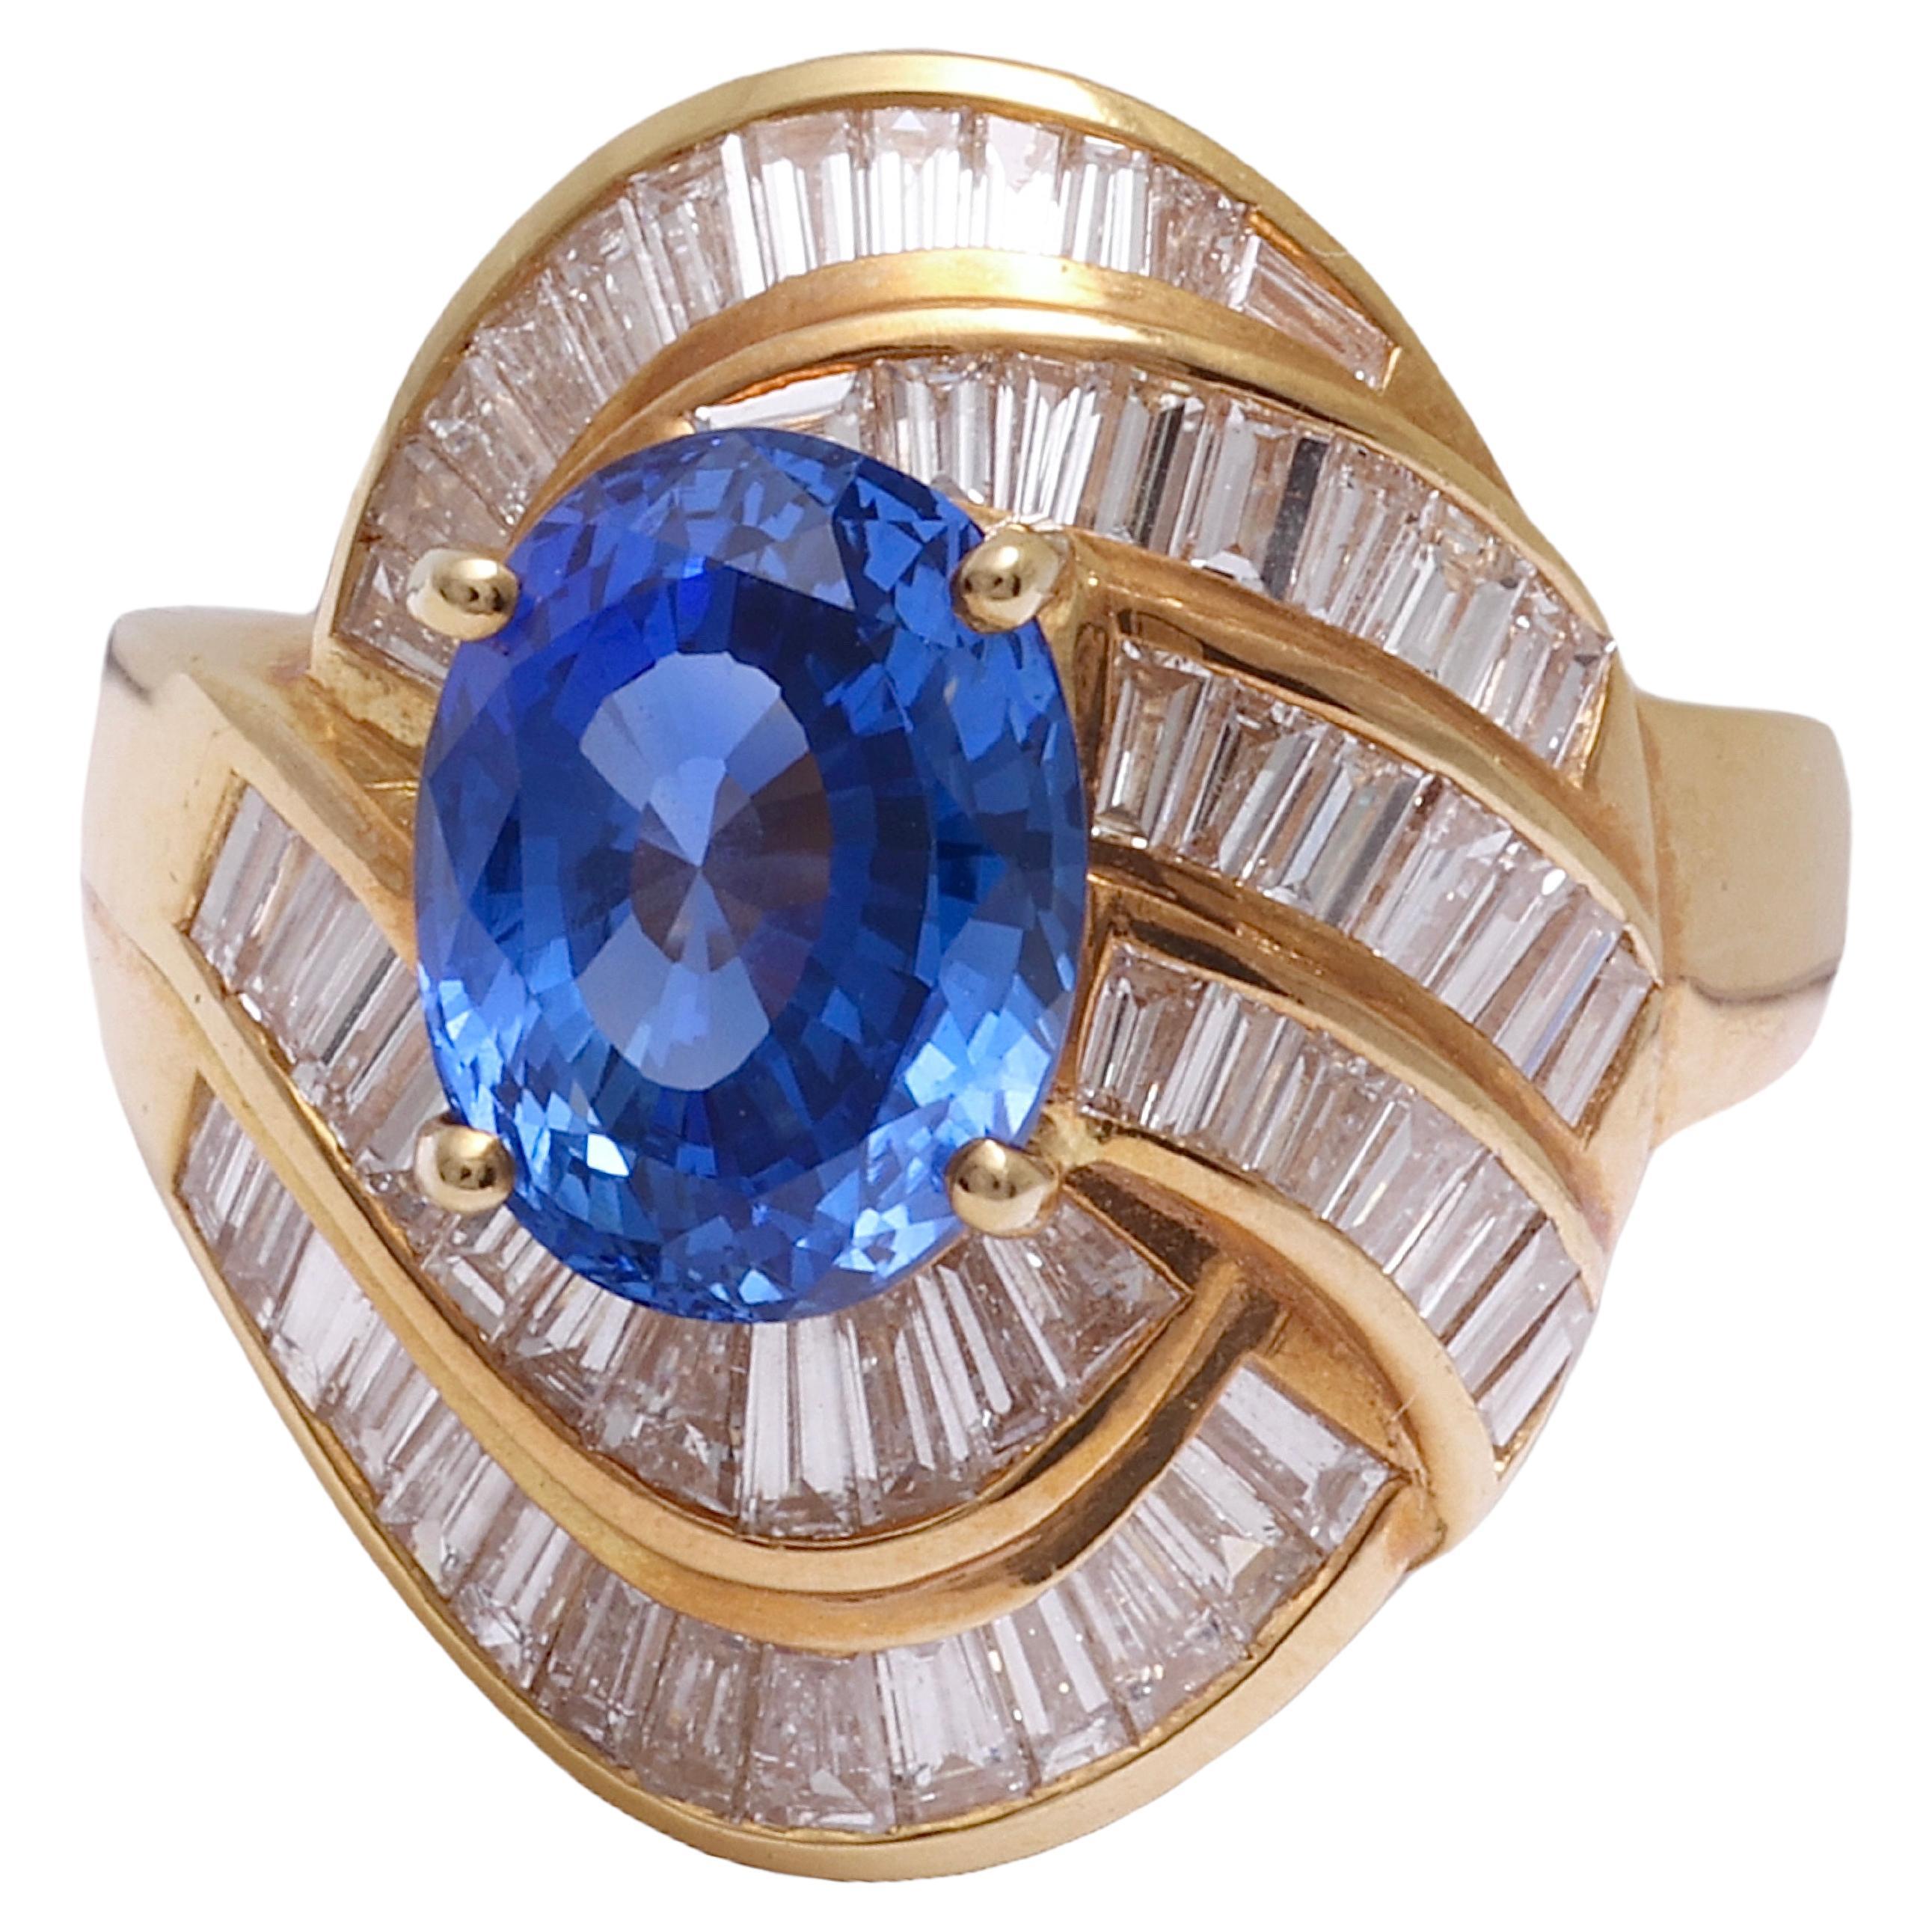  18 kt. Gold Ring With Ceylon Sapphire & Baguette Cut Diamonds For Sale